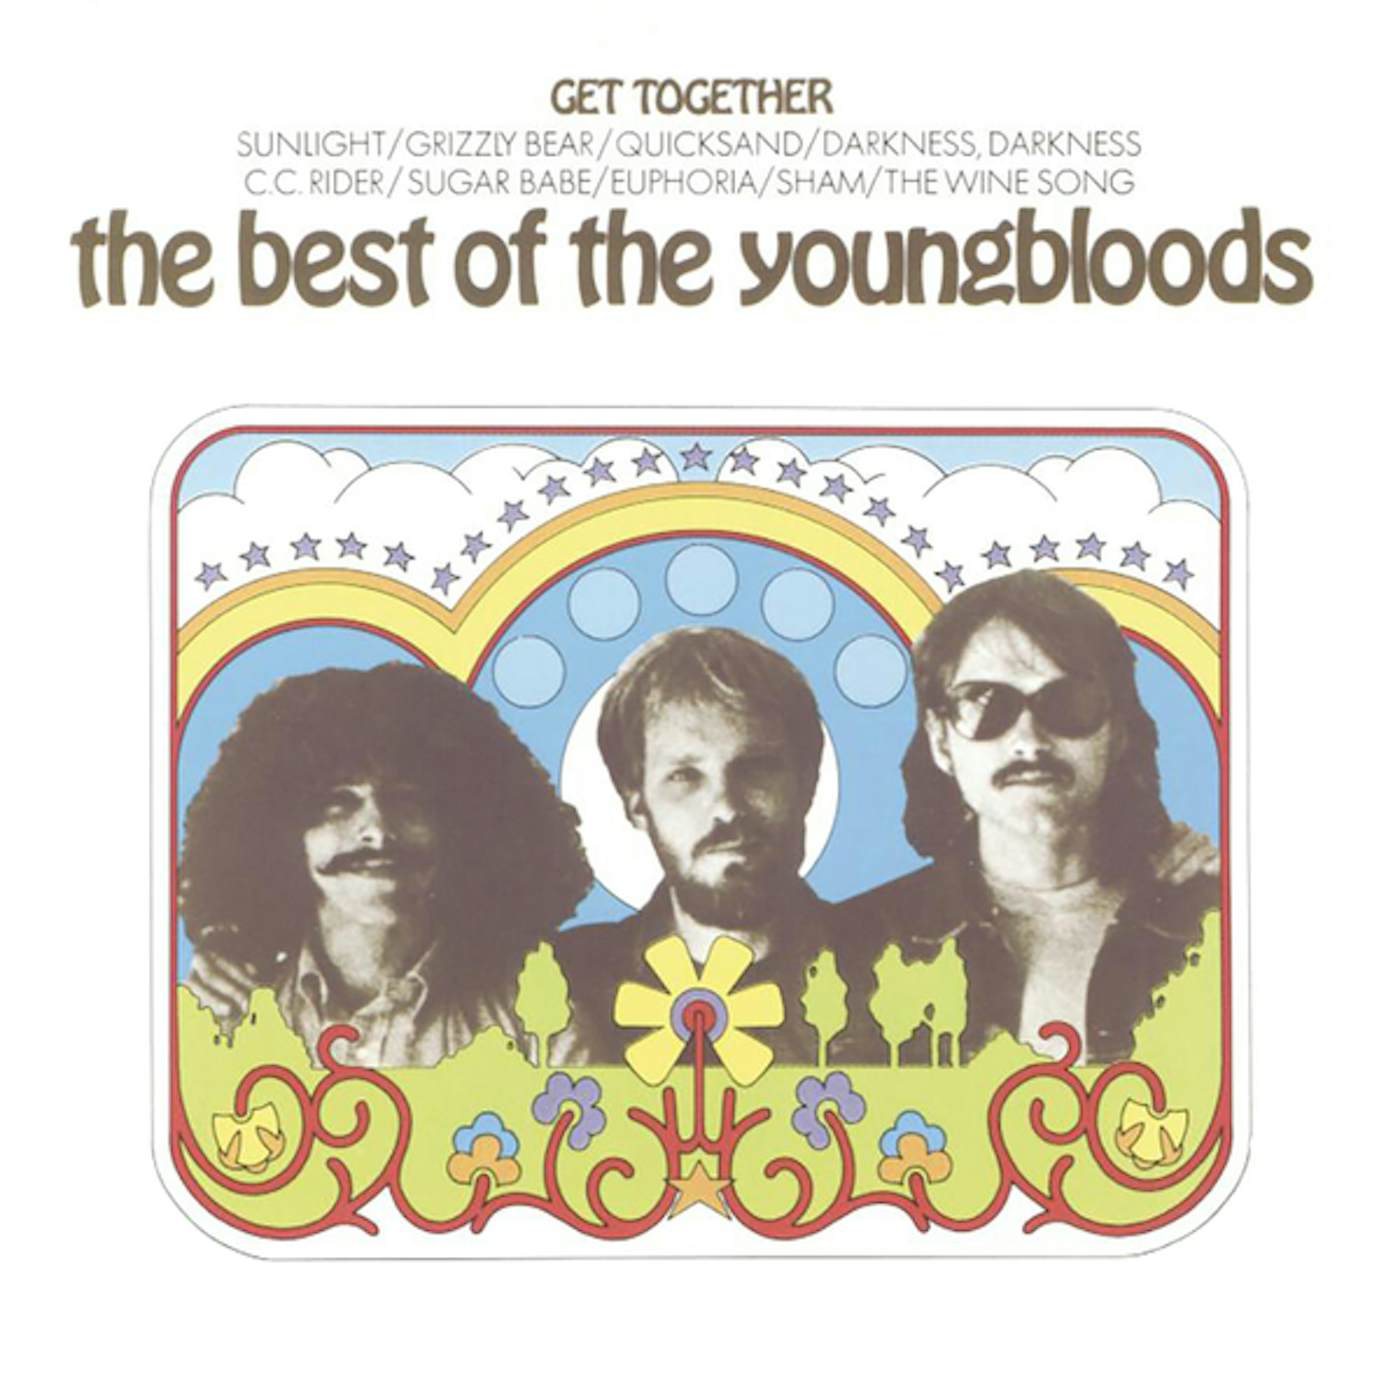 BEST OF THE YOUNGBLOODS CD